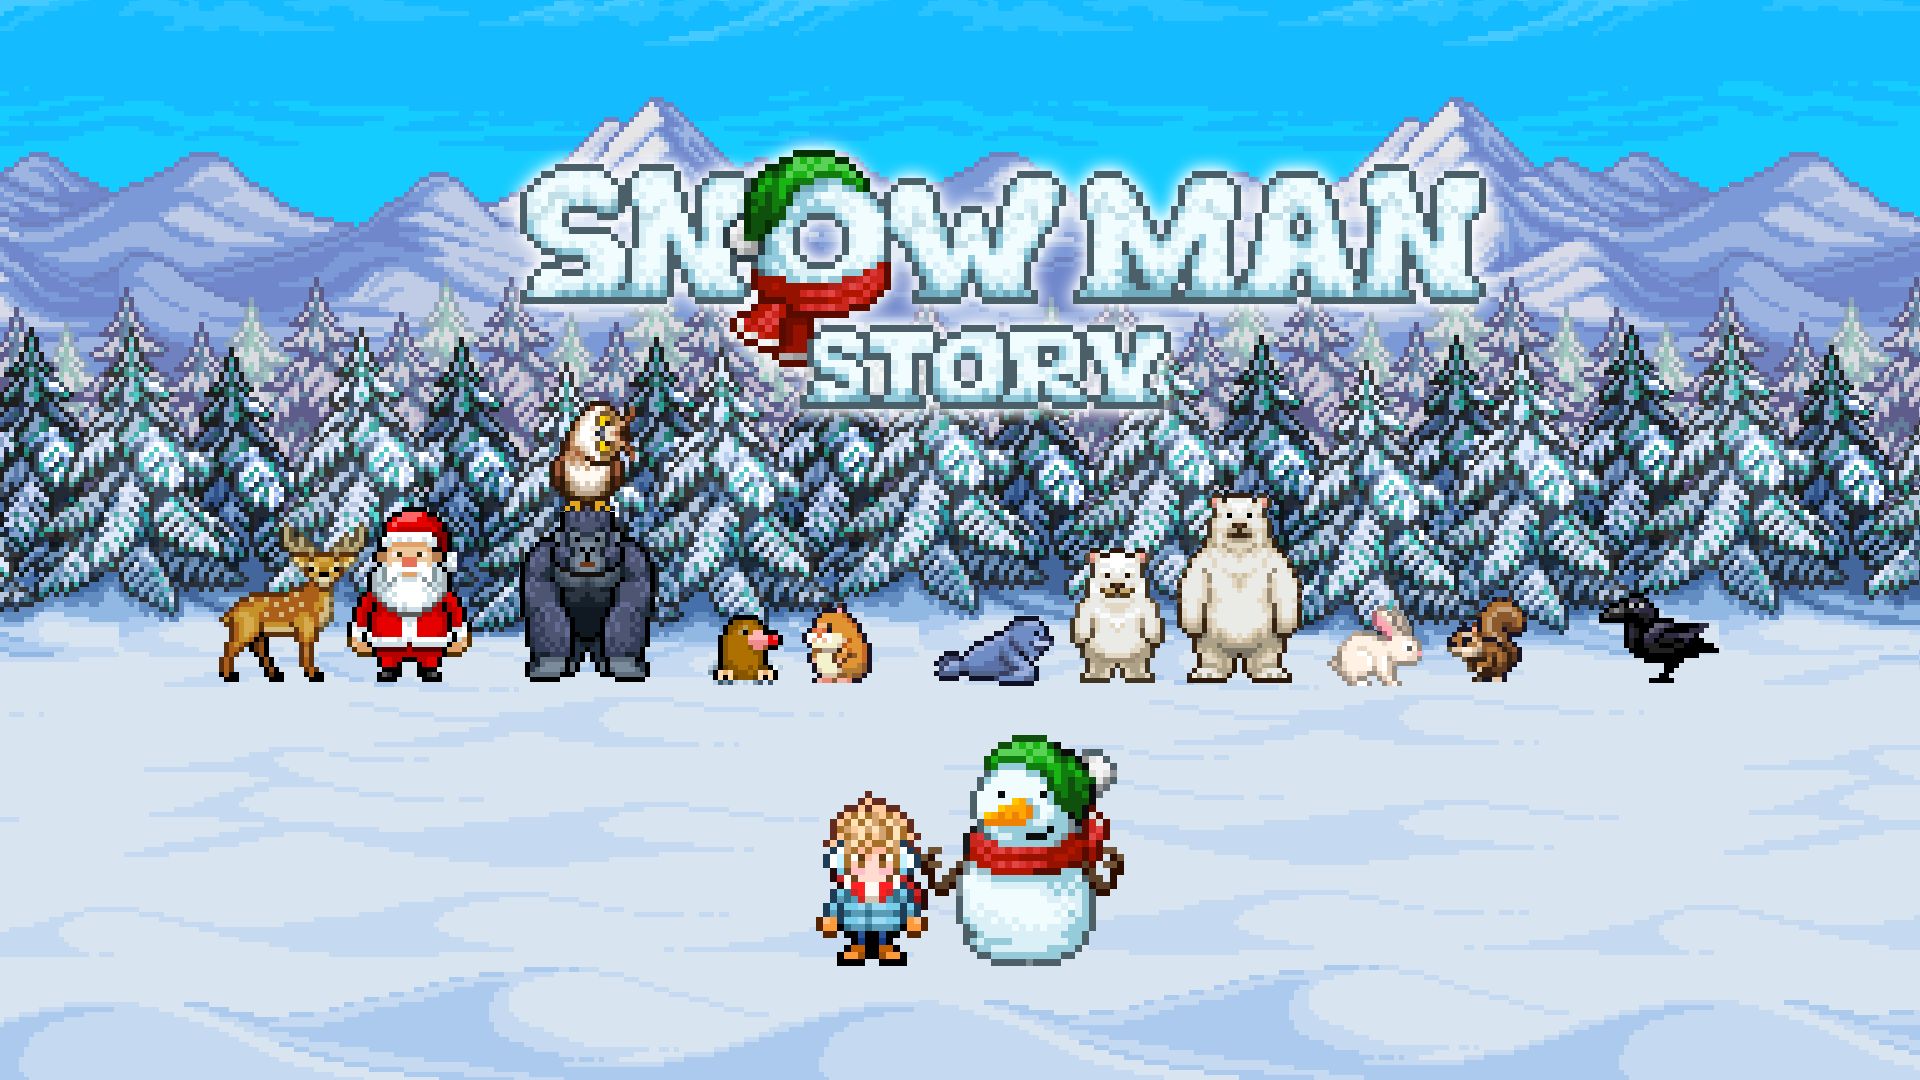 Scarica Snowman Story gratis per Android.